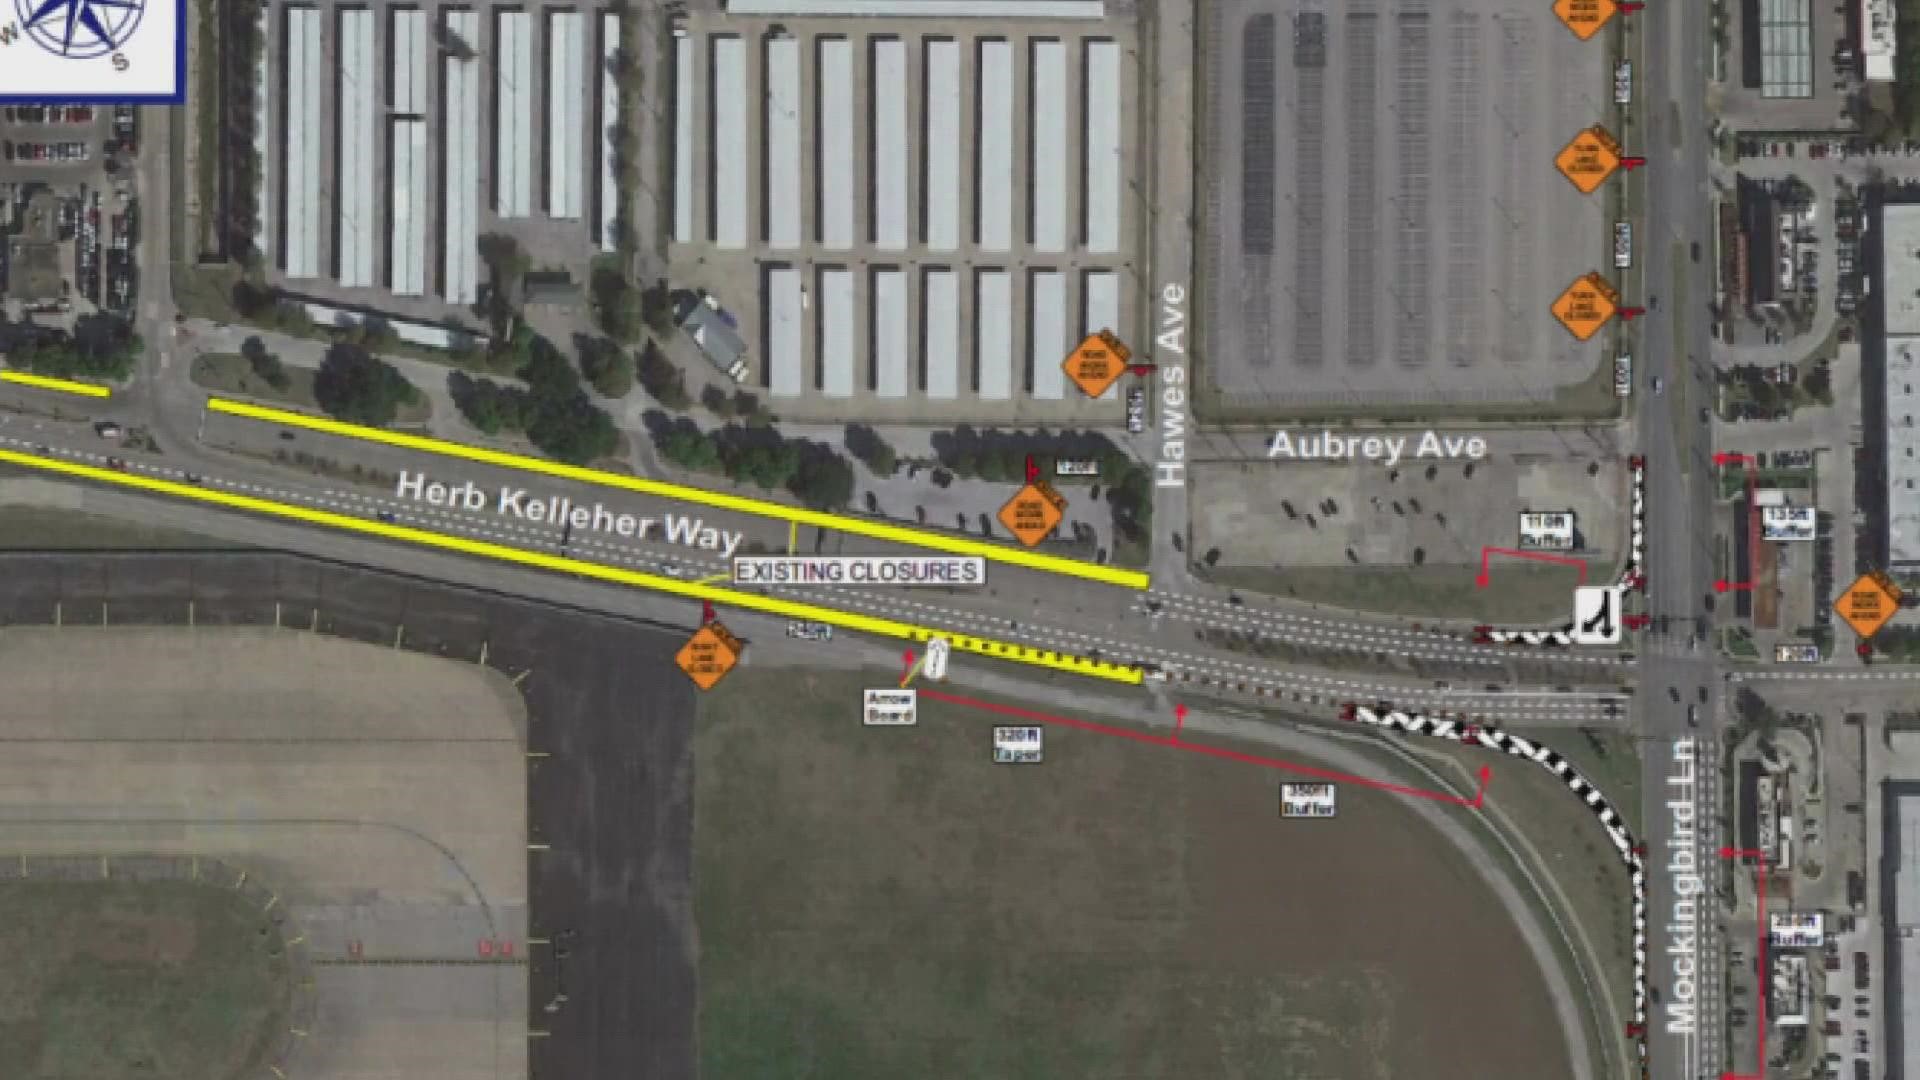 Construction is happening in and around Dallas Love Field Airport. Here's what you need to know.